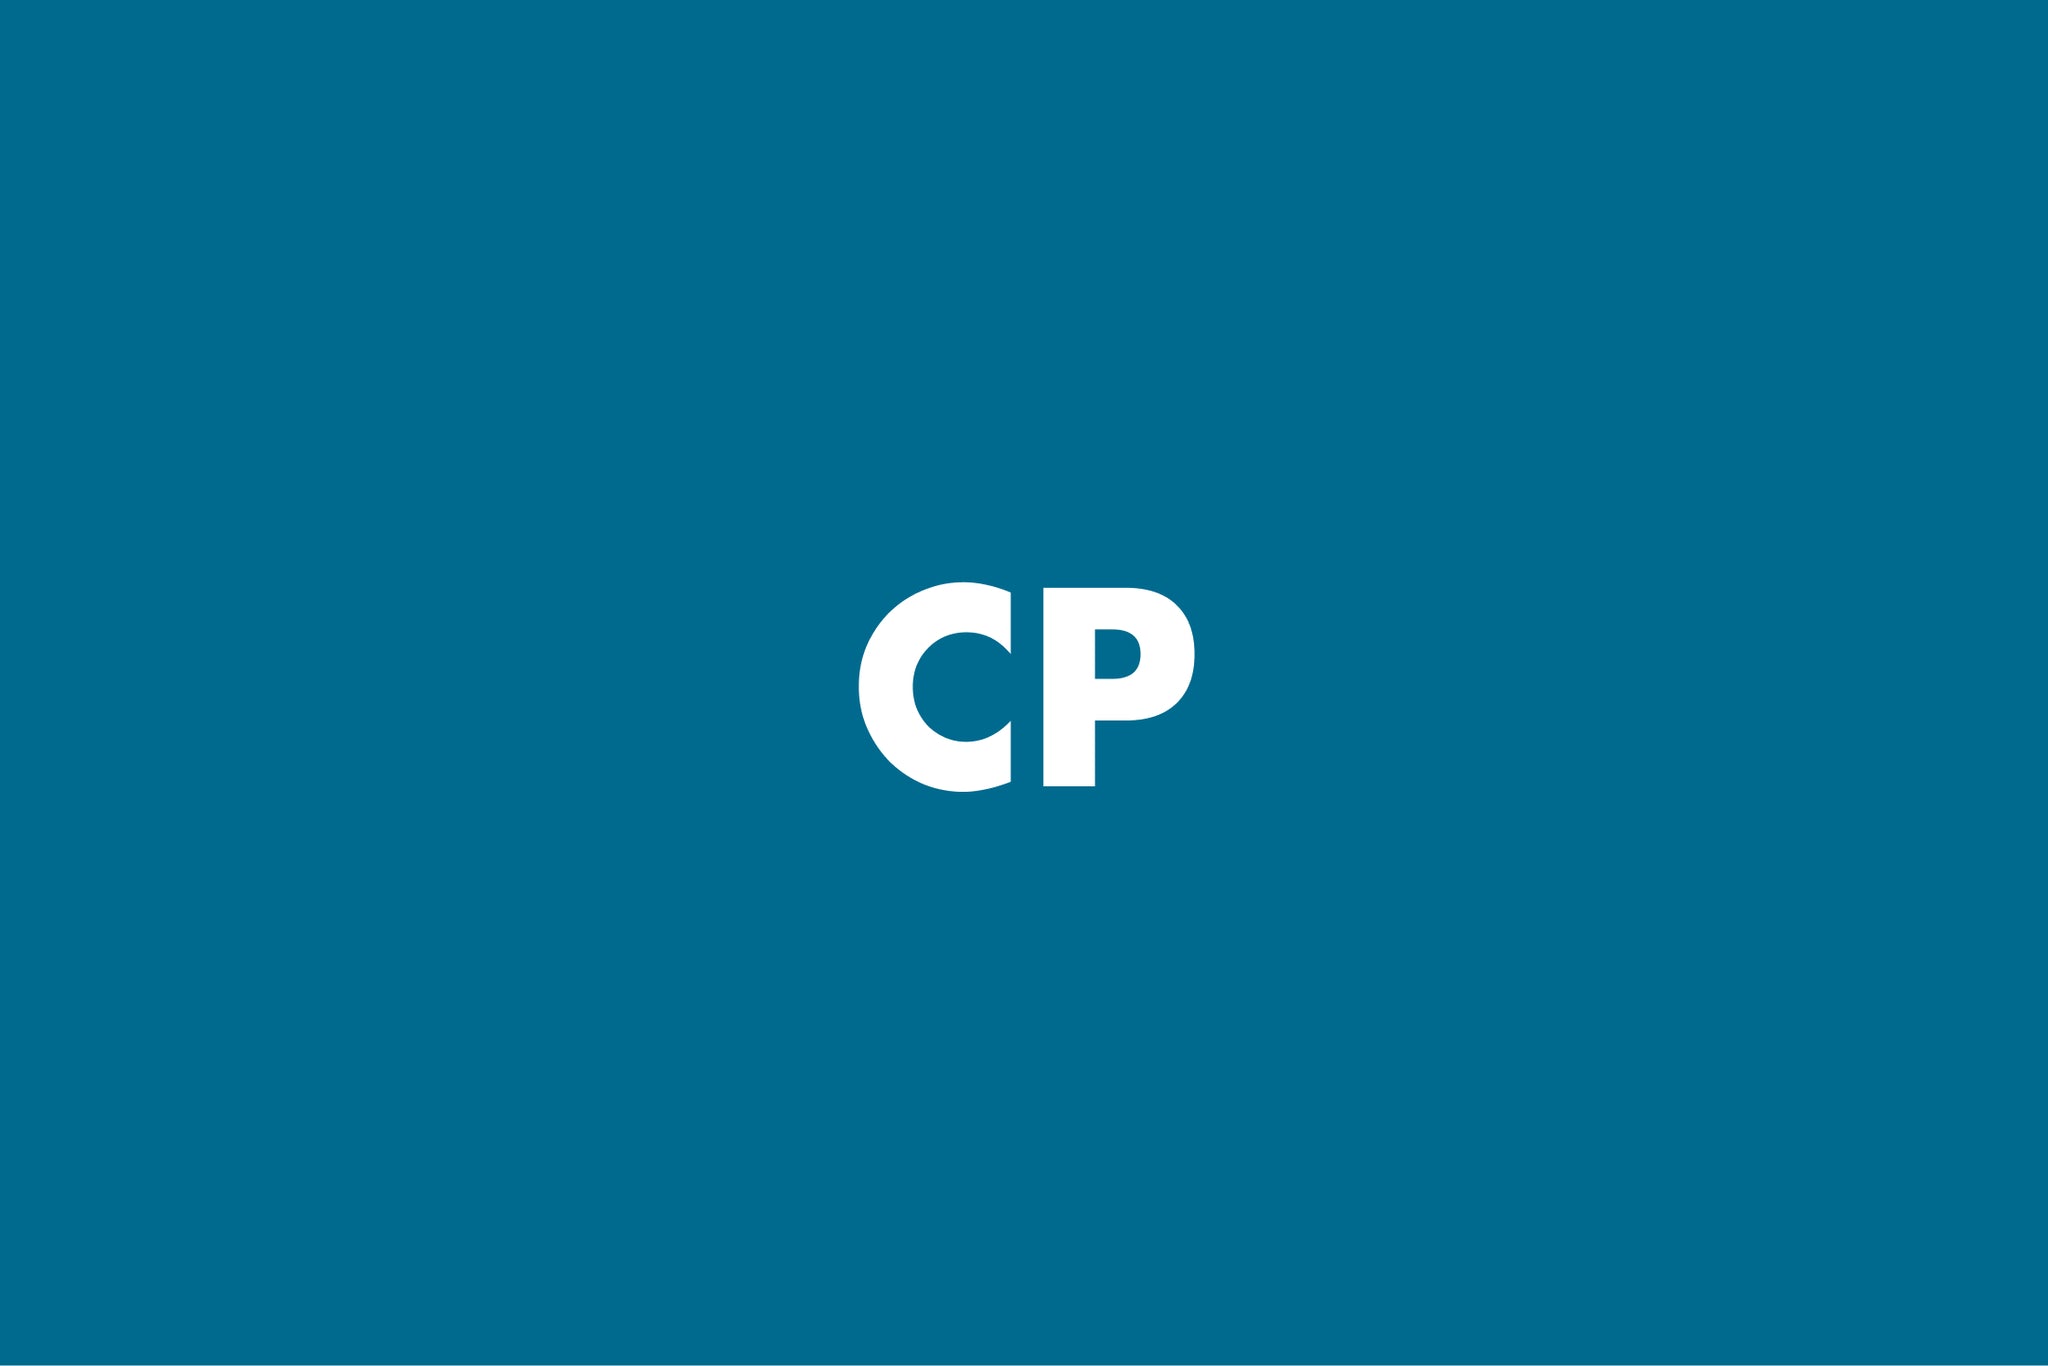 The initials CP in white on blue background